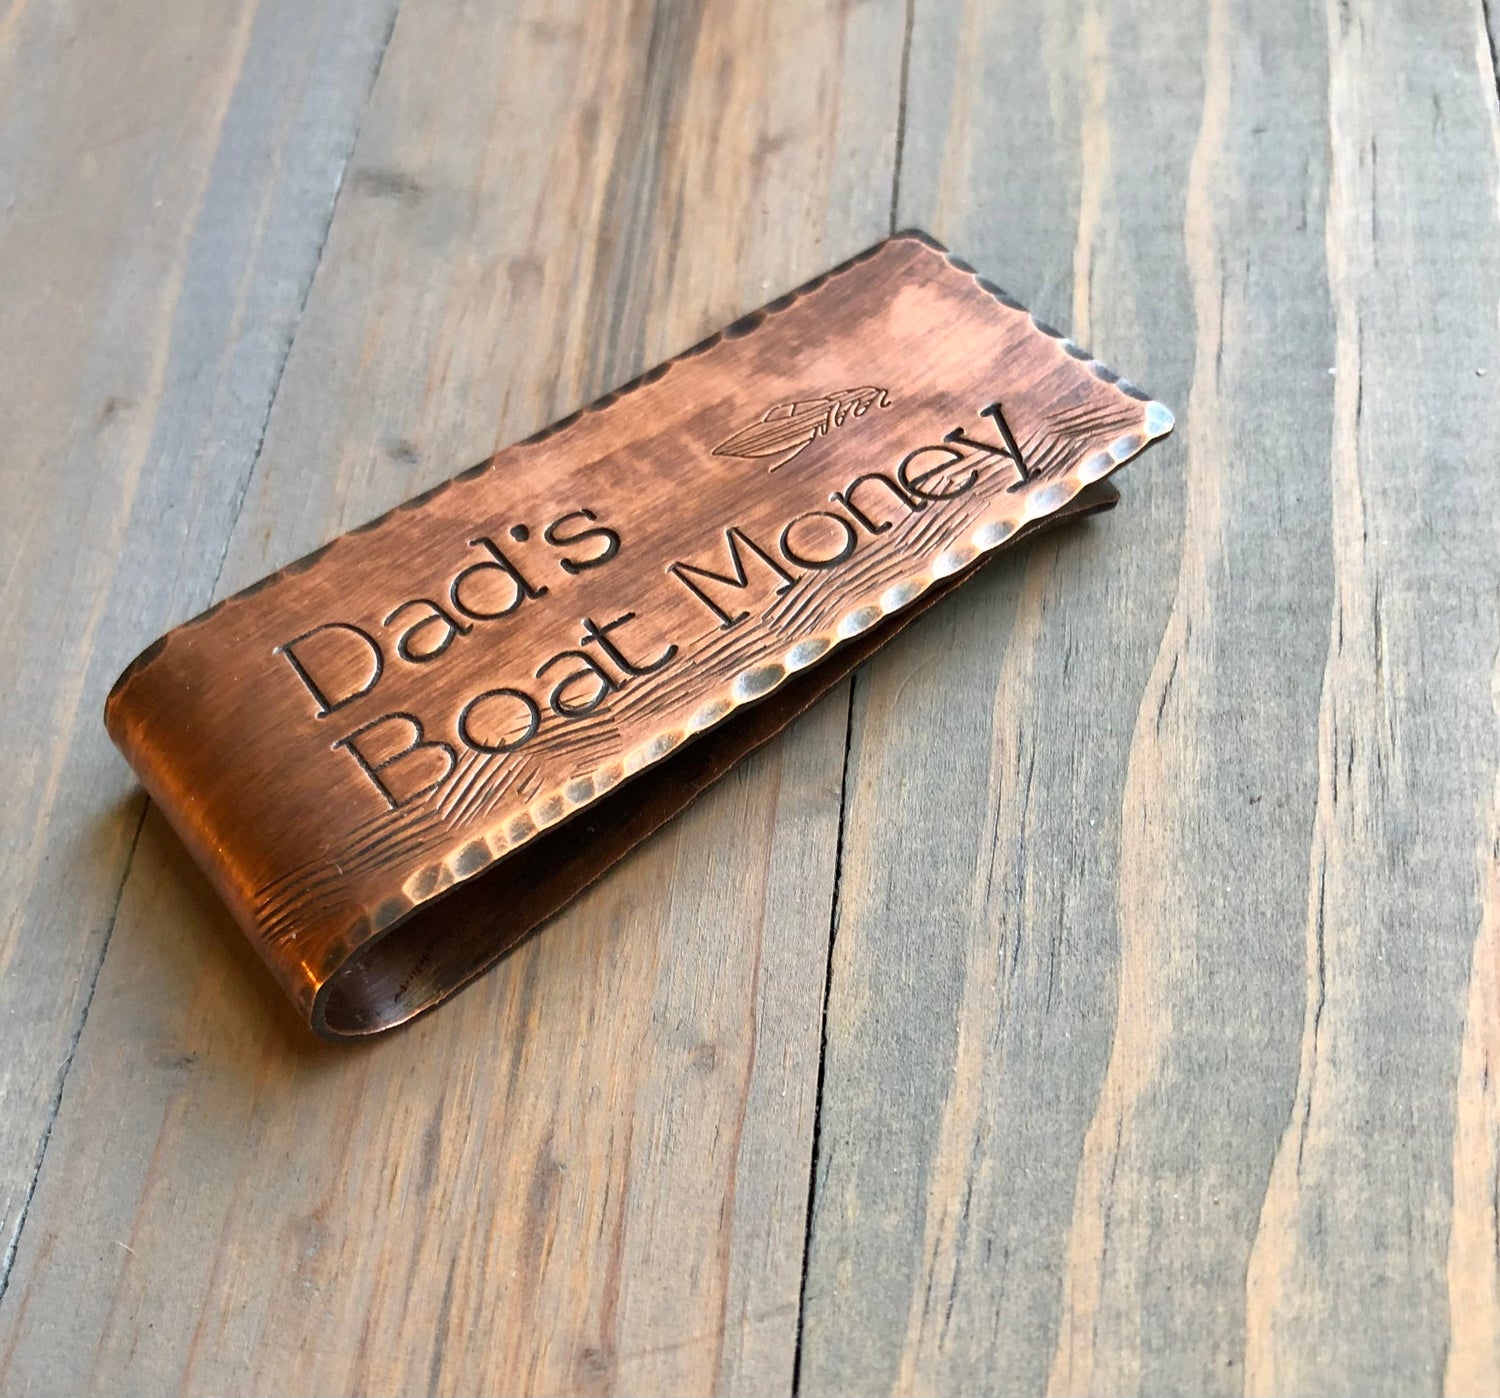 Copper Money Clip For Father's Day - Gift for Boater - Personalized Boating Money Clip - Custom Money Clip with Speed Boat - Power Boat Gift